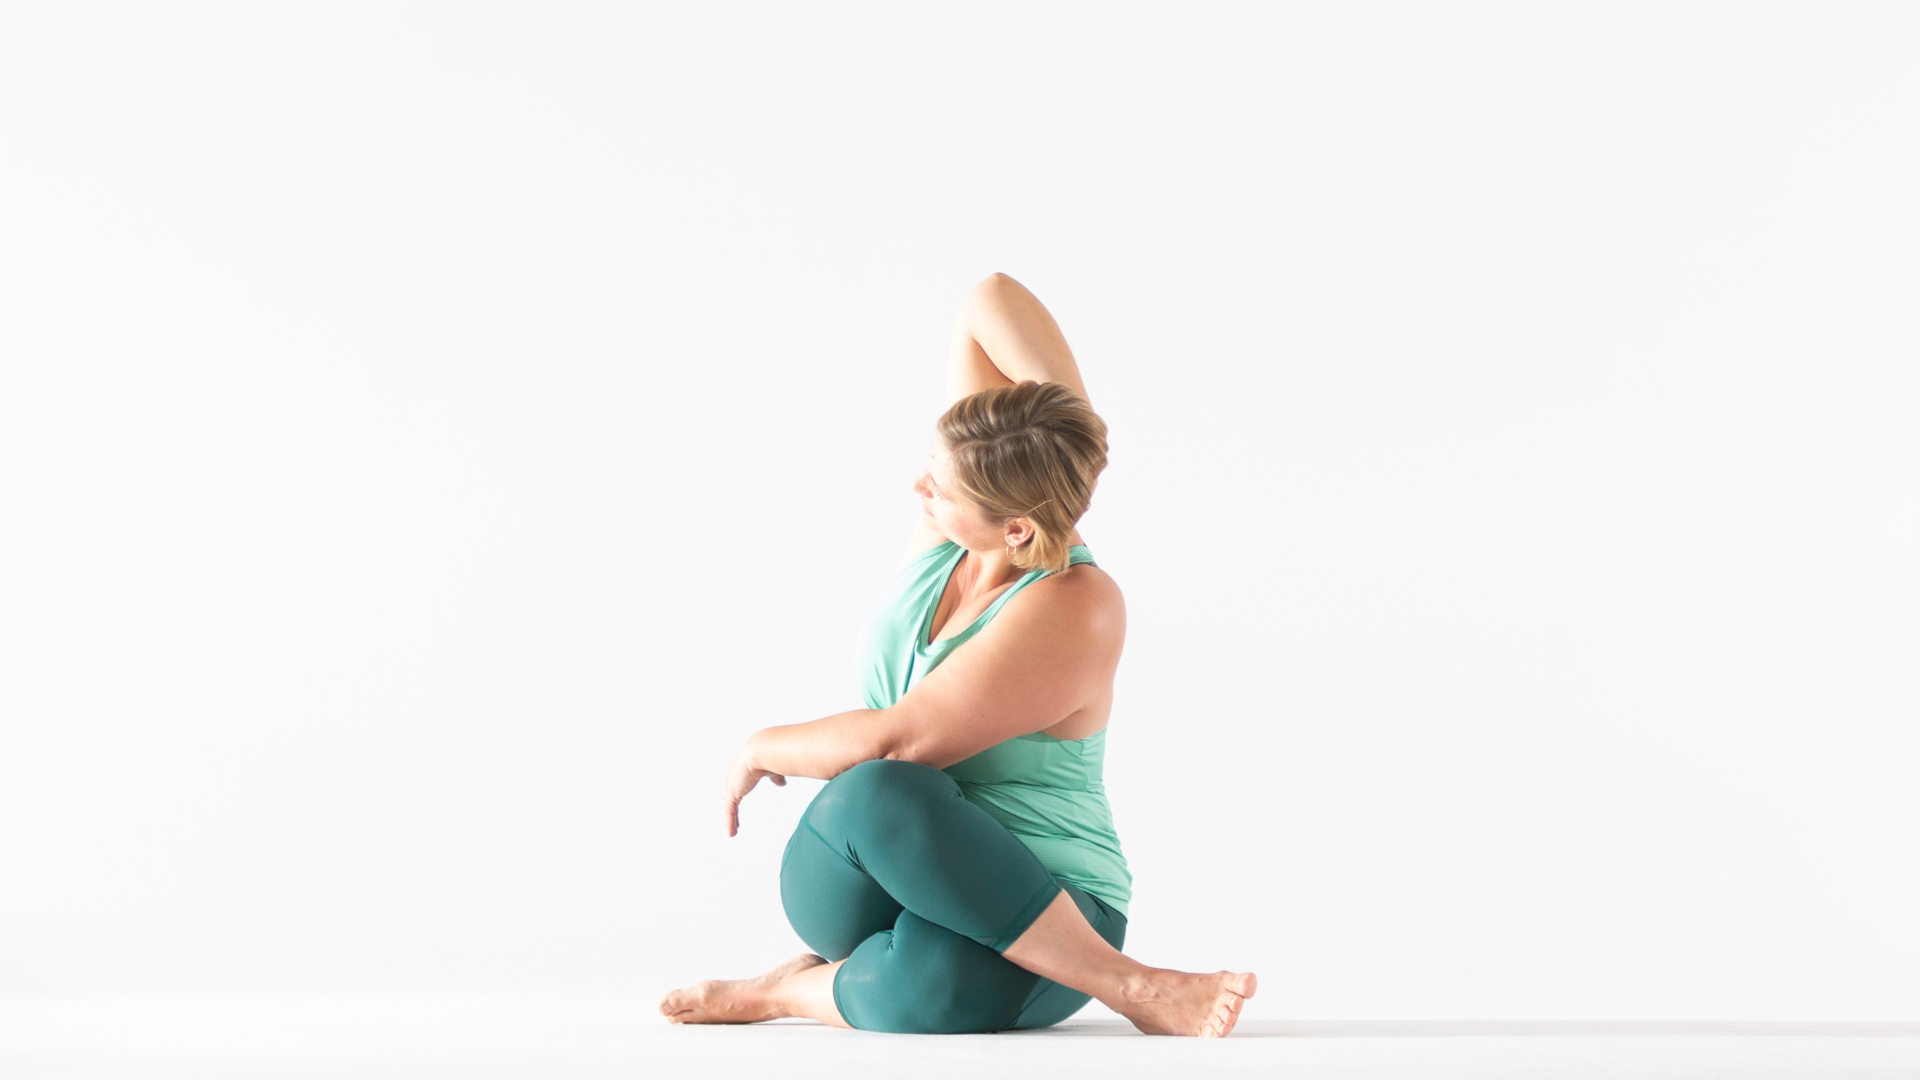 Spinal Roll Down Flow Yoga  Yoga Sequences, Benefits, Variations